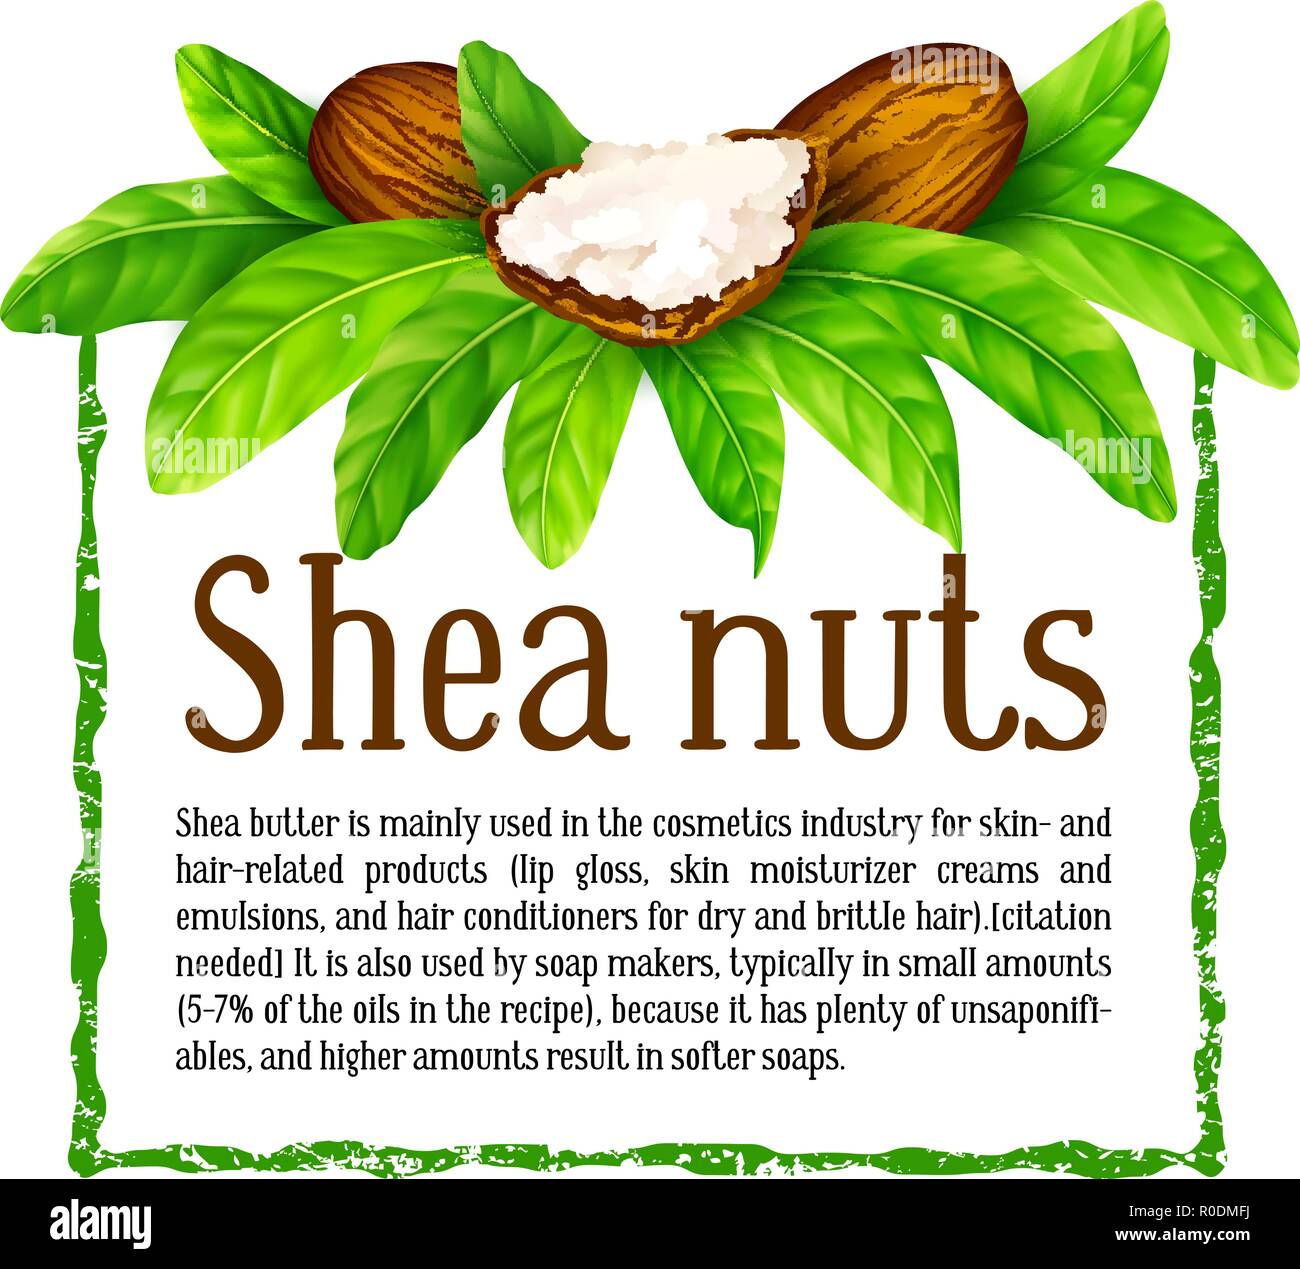 Shea nuts with leaves in vector. Stock Vector